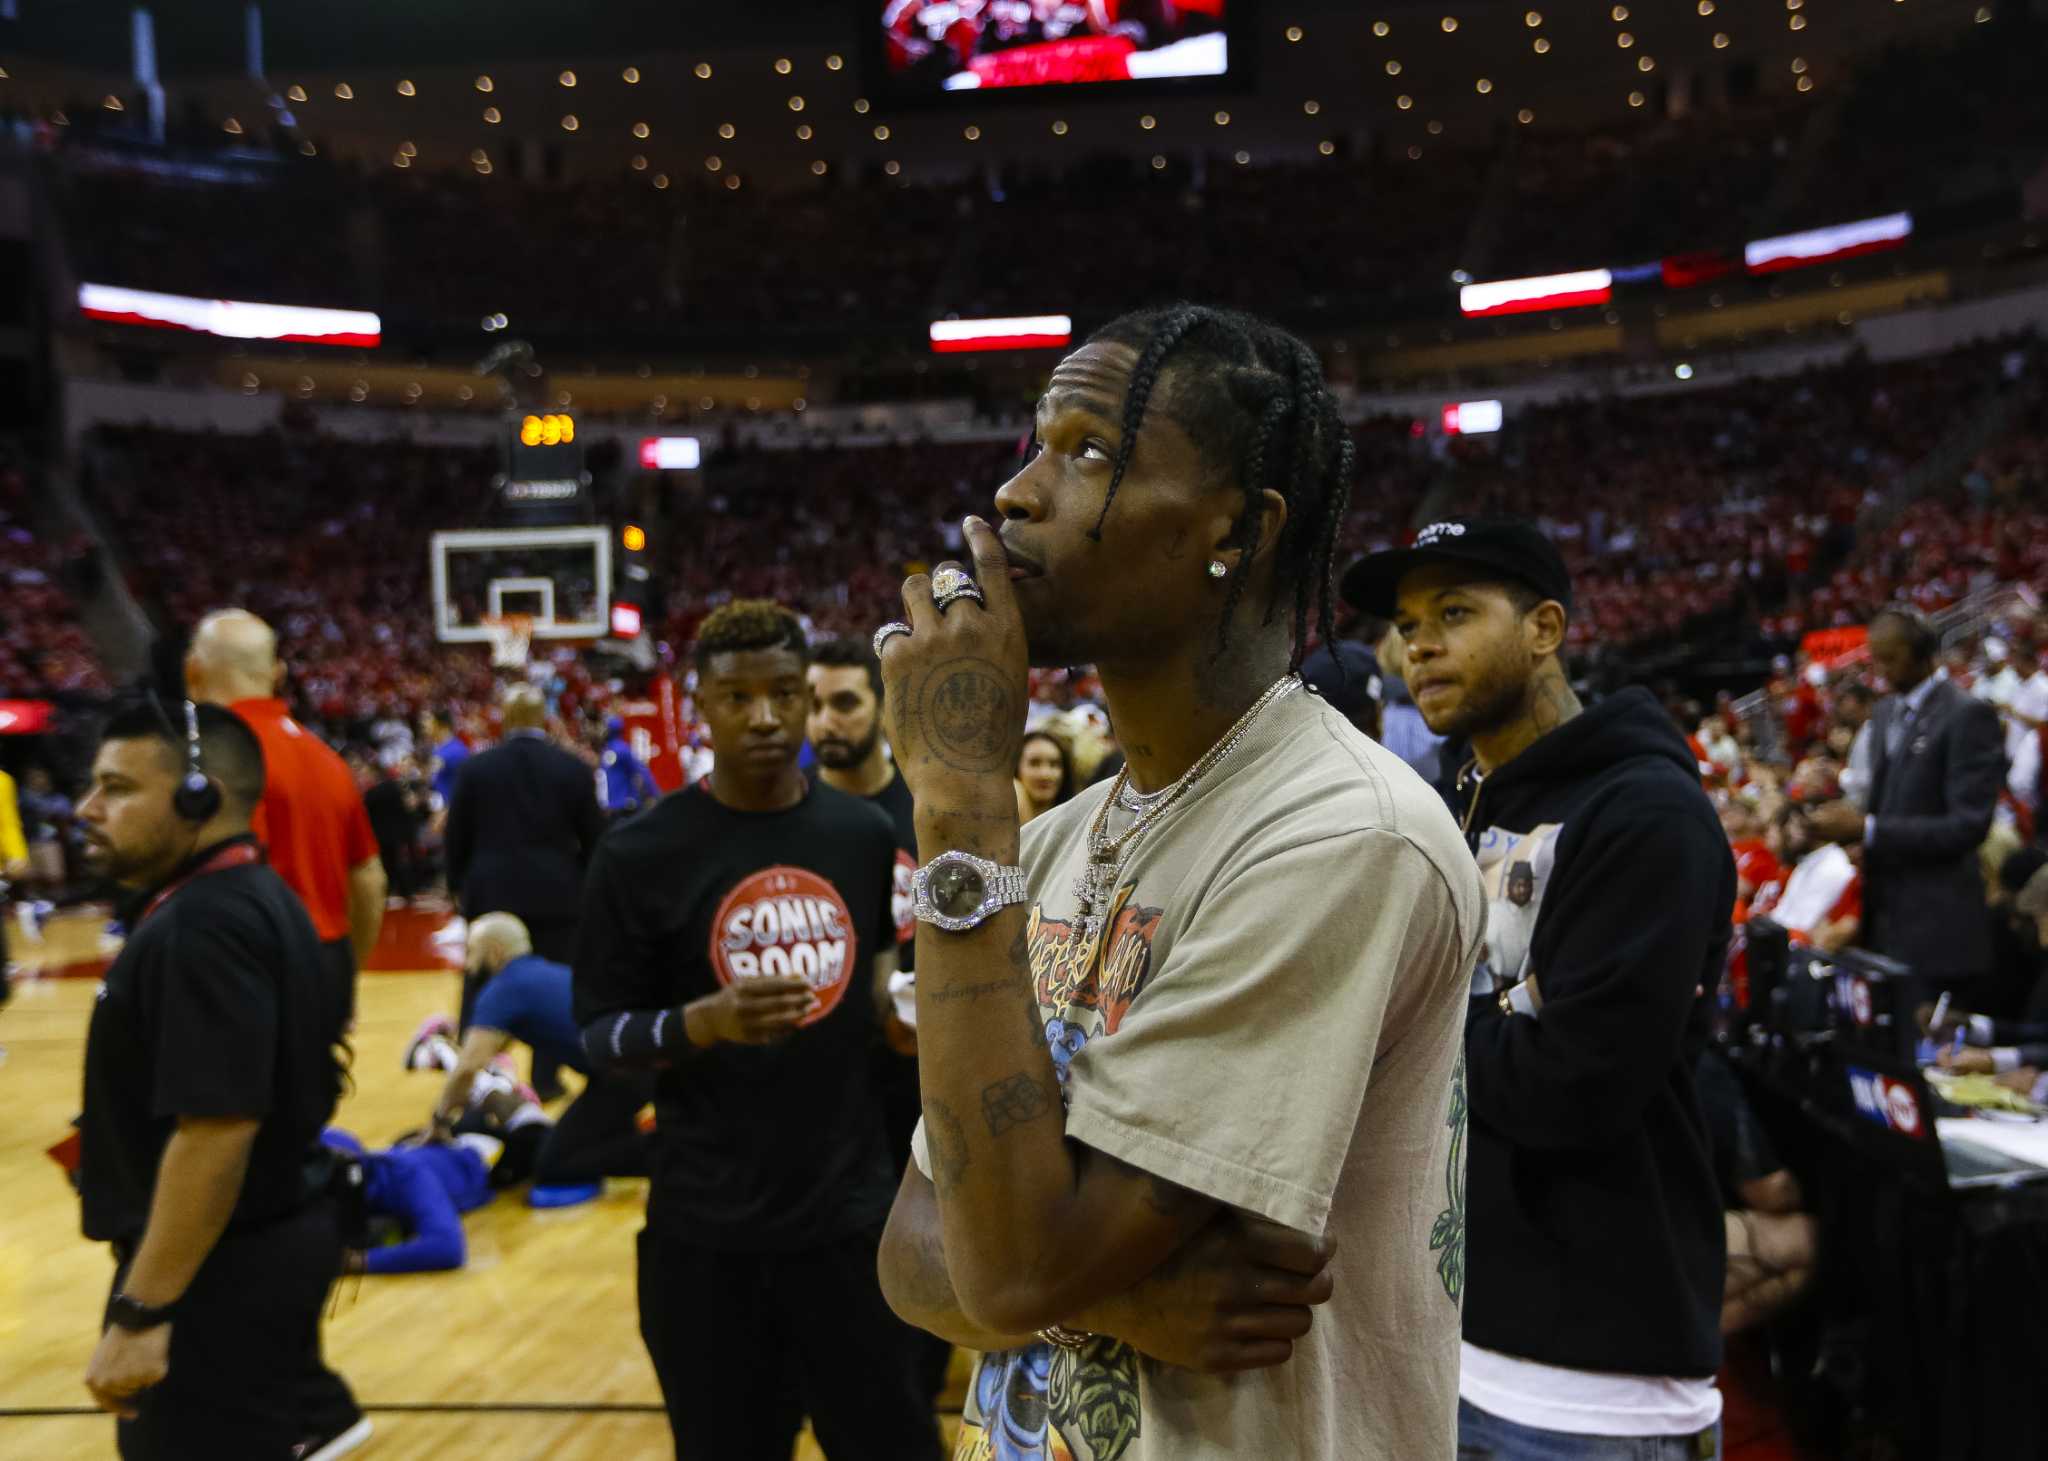 In rare public appearance, Travis Scott seen courtside at Houston Rockets  game Sunday